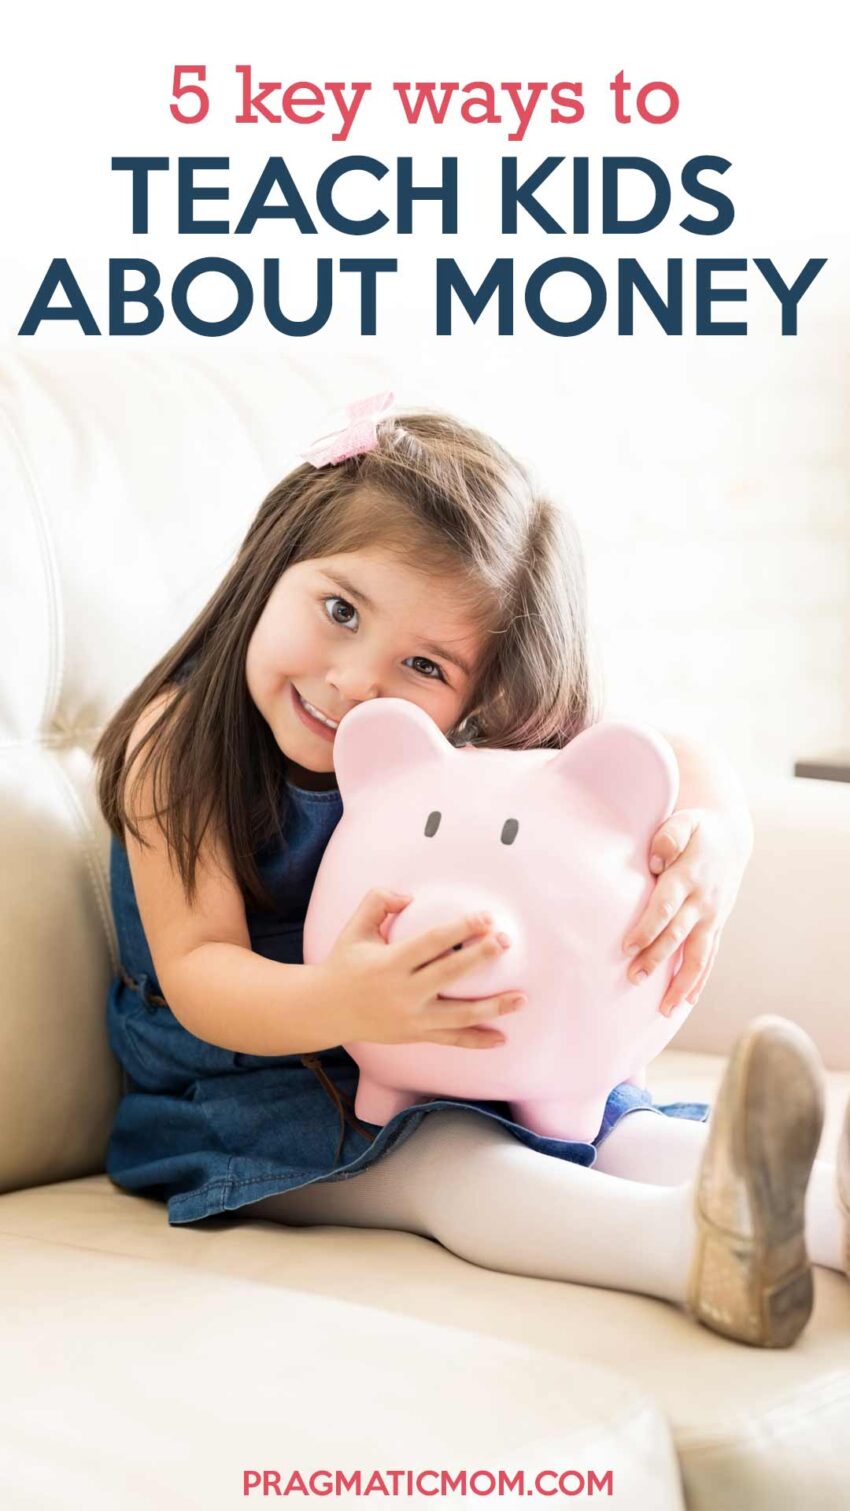 5 Key Ways to Teach Your Kids About Money